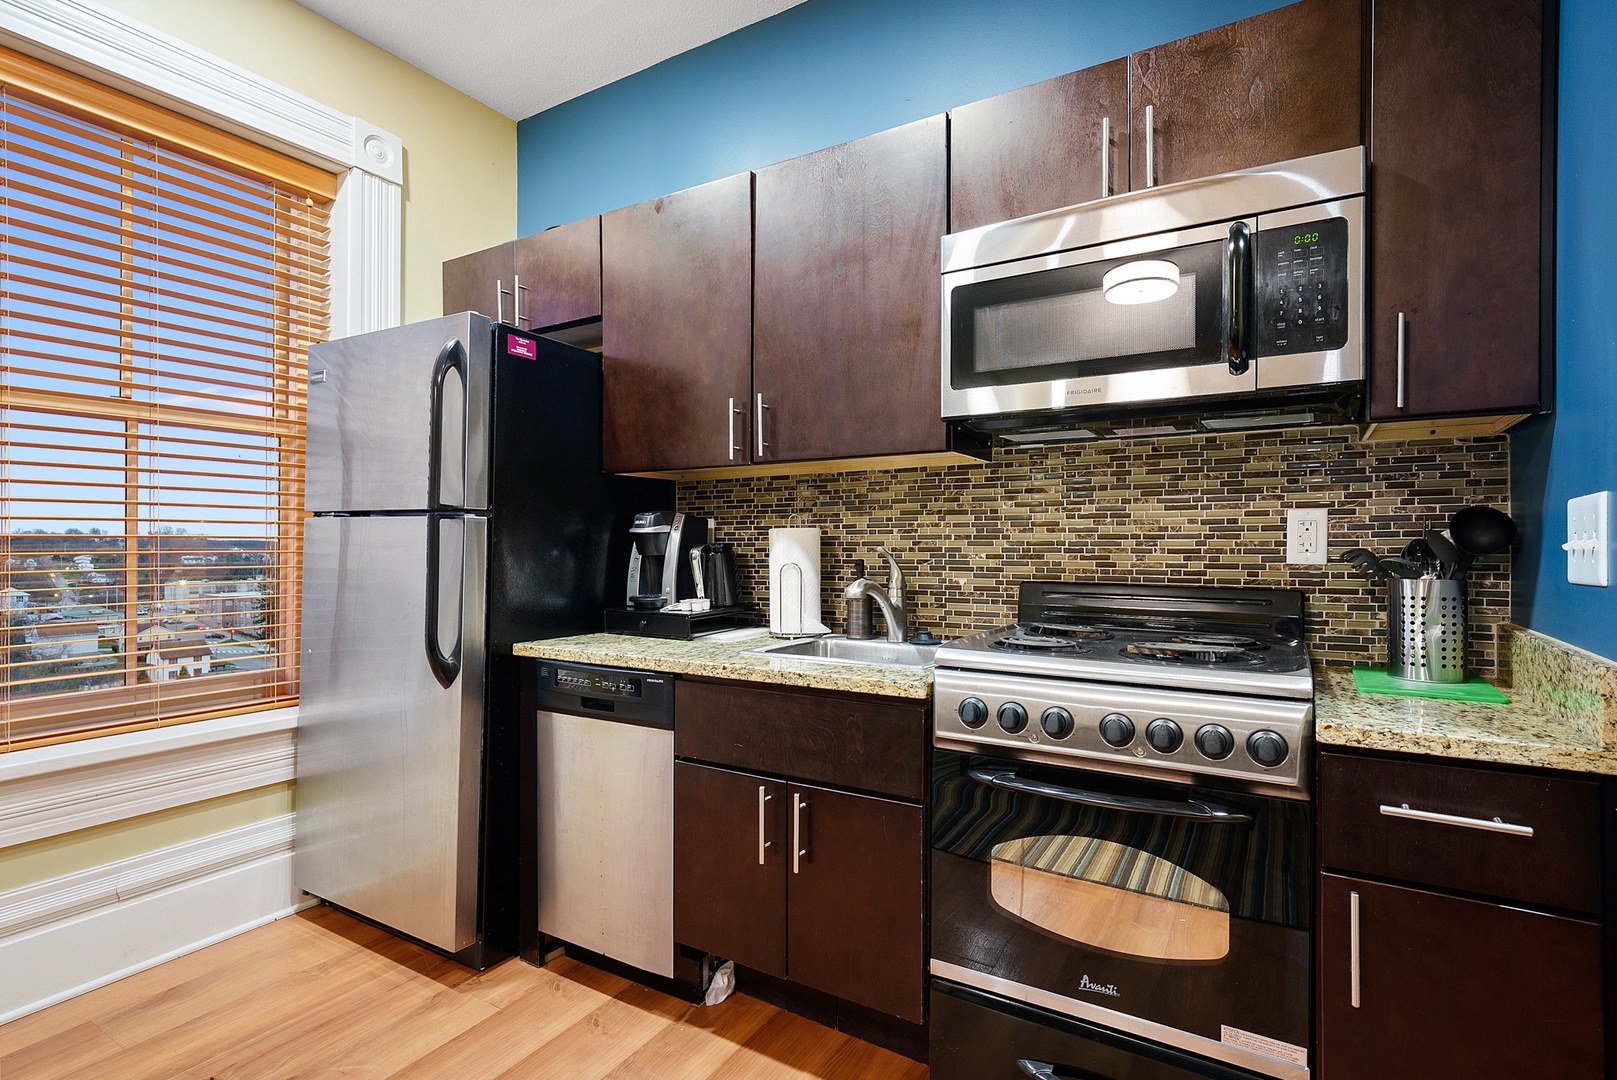 accommodation with modern amenities in St. Clairsville